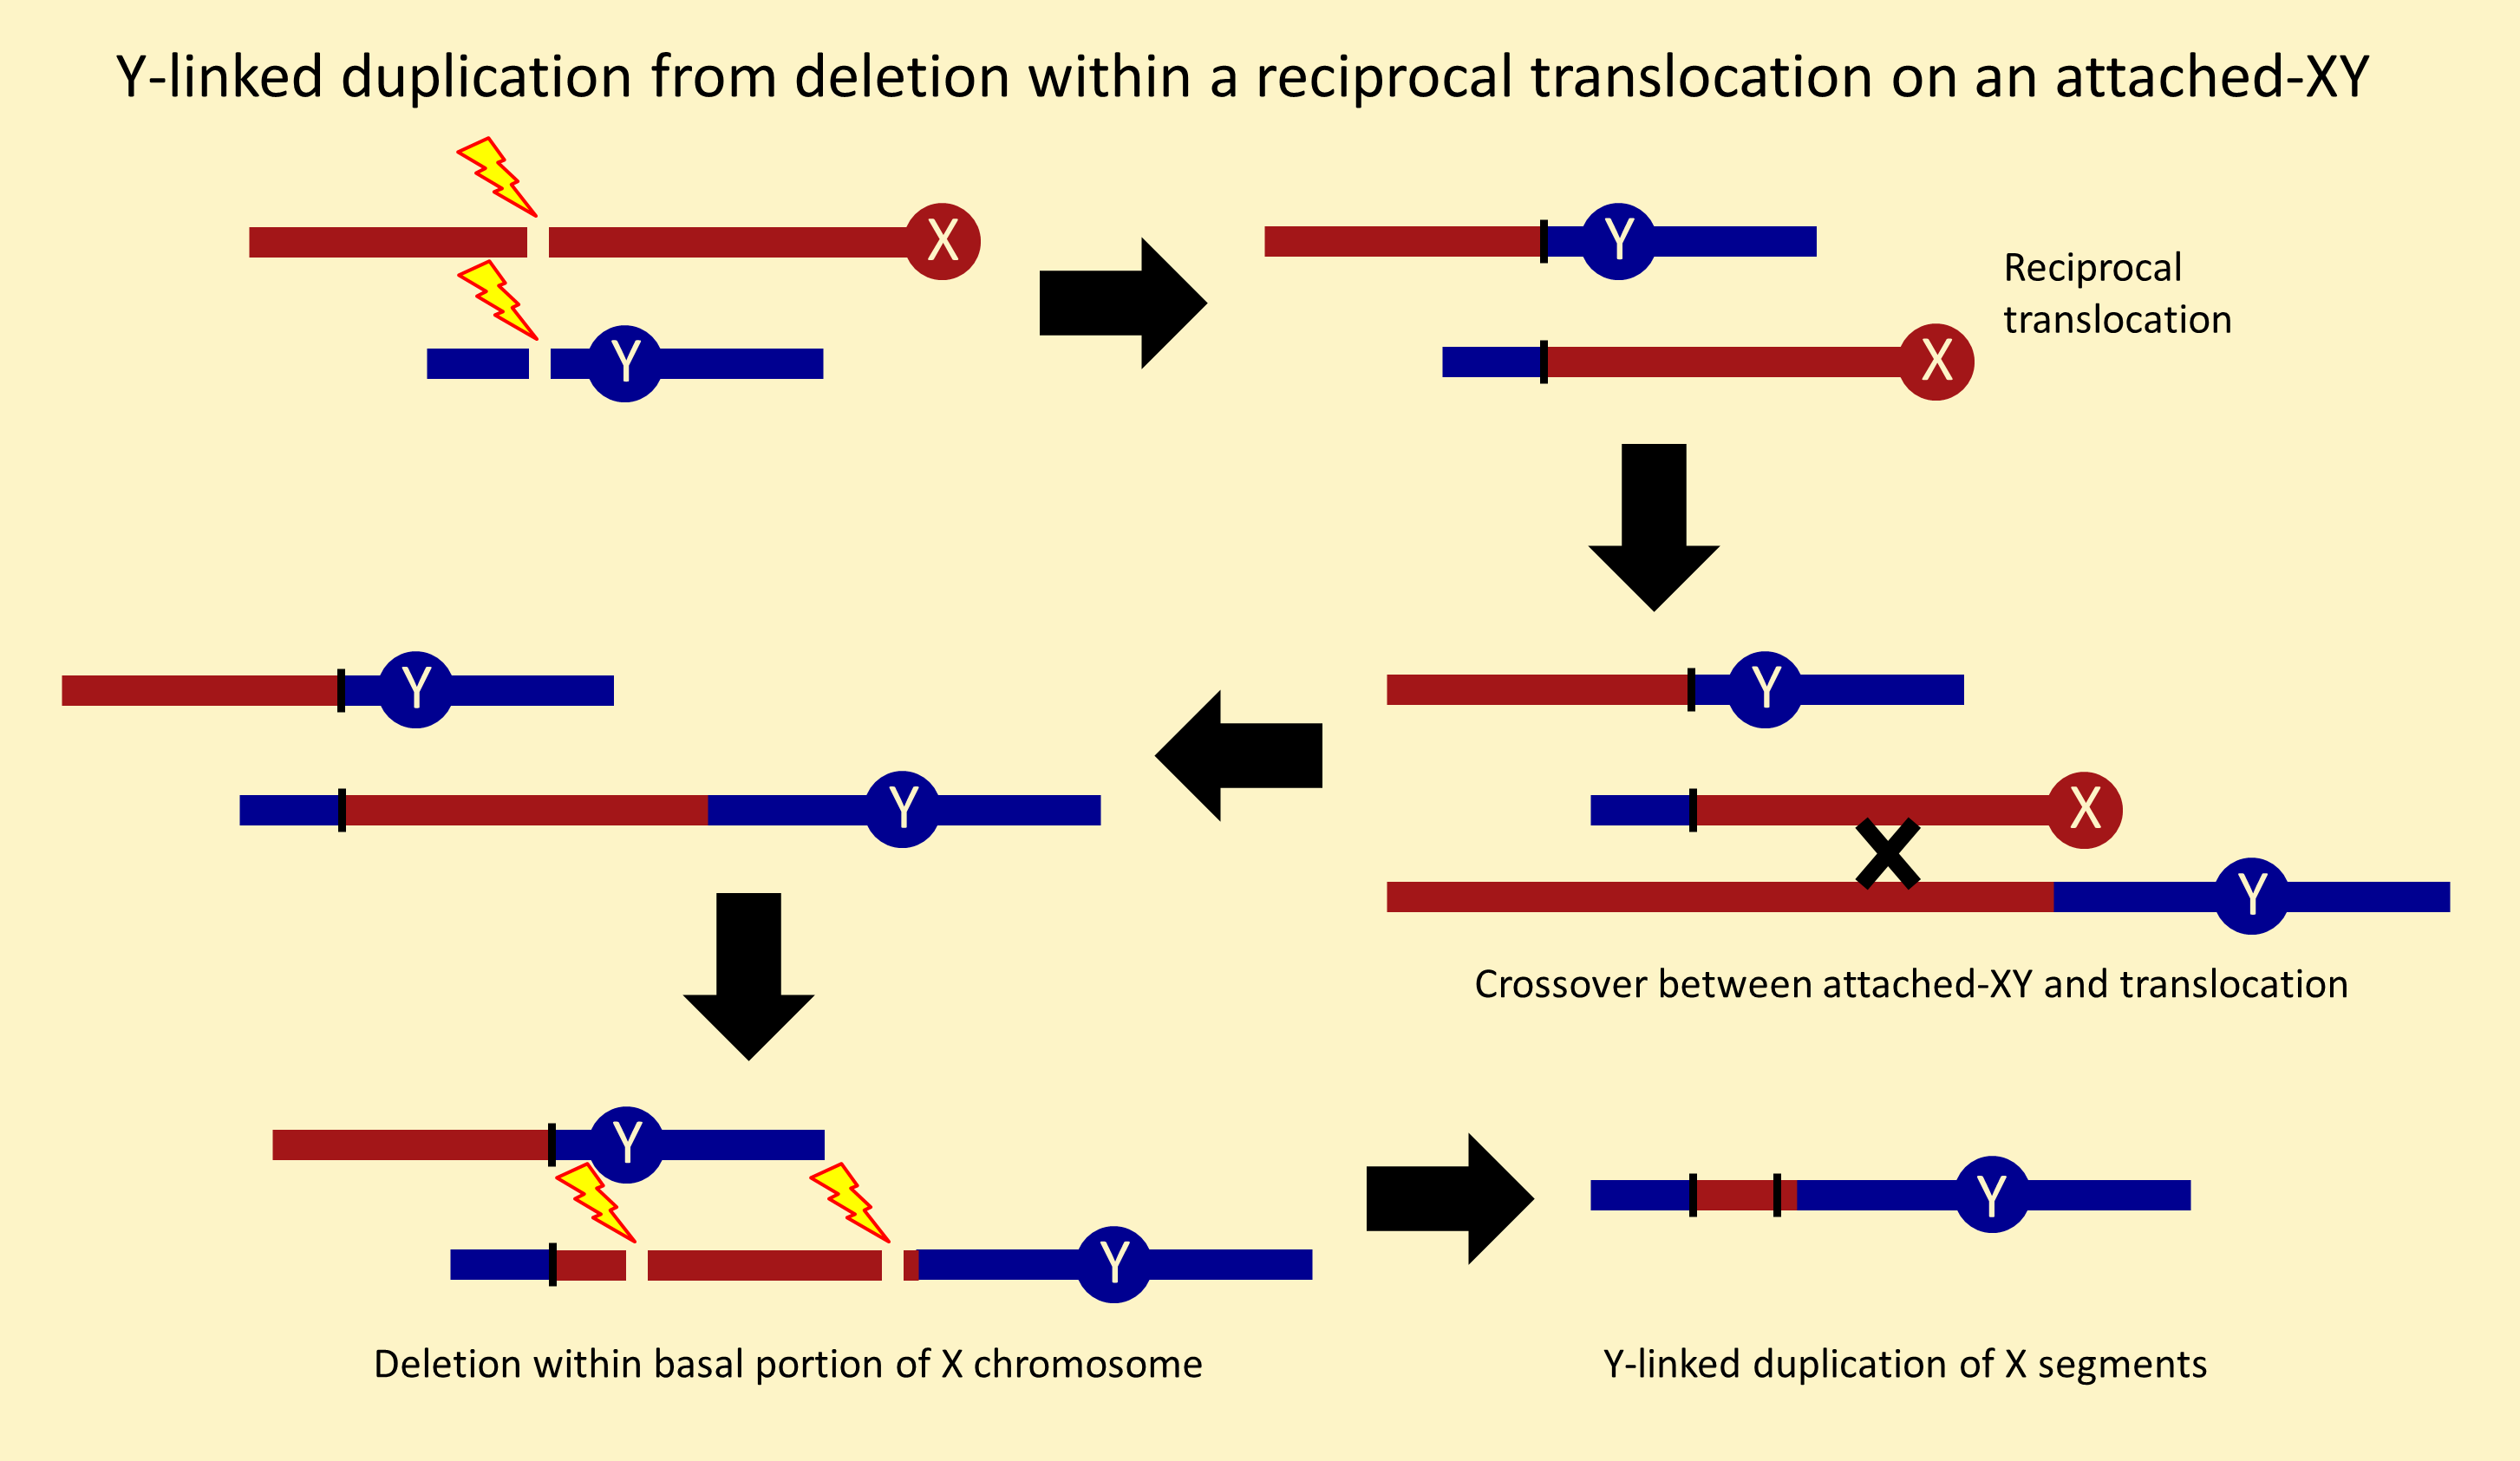  Y-linked duplication from deletion within a reciprocal translocation